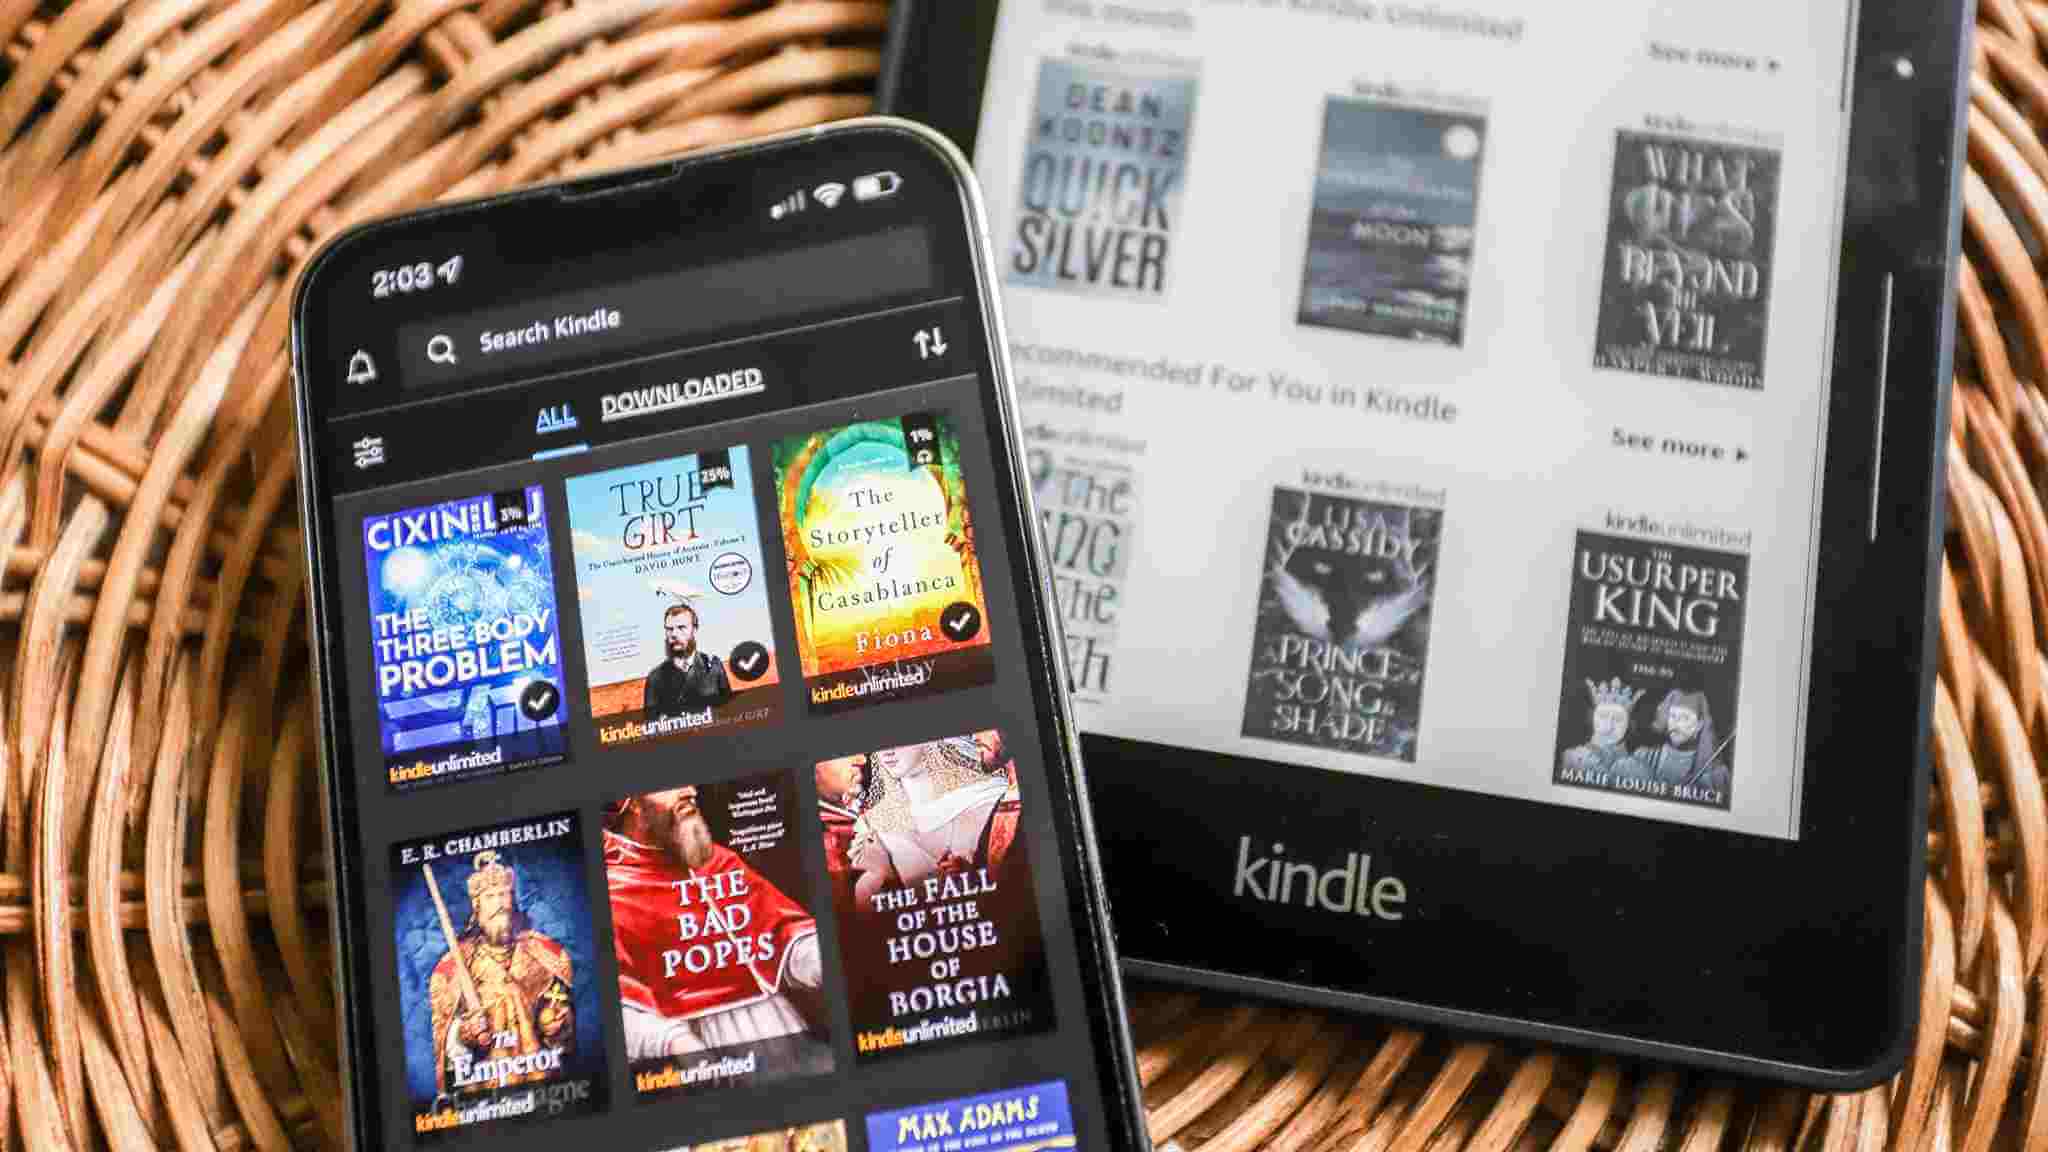 How to Change Location on Kindle